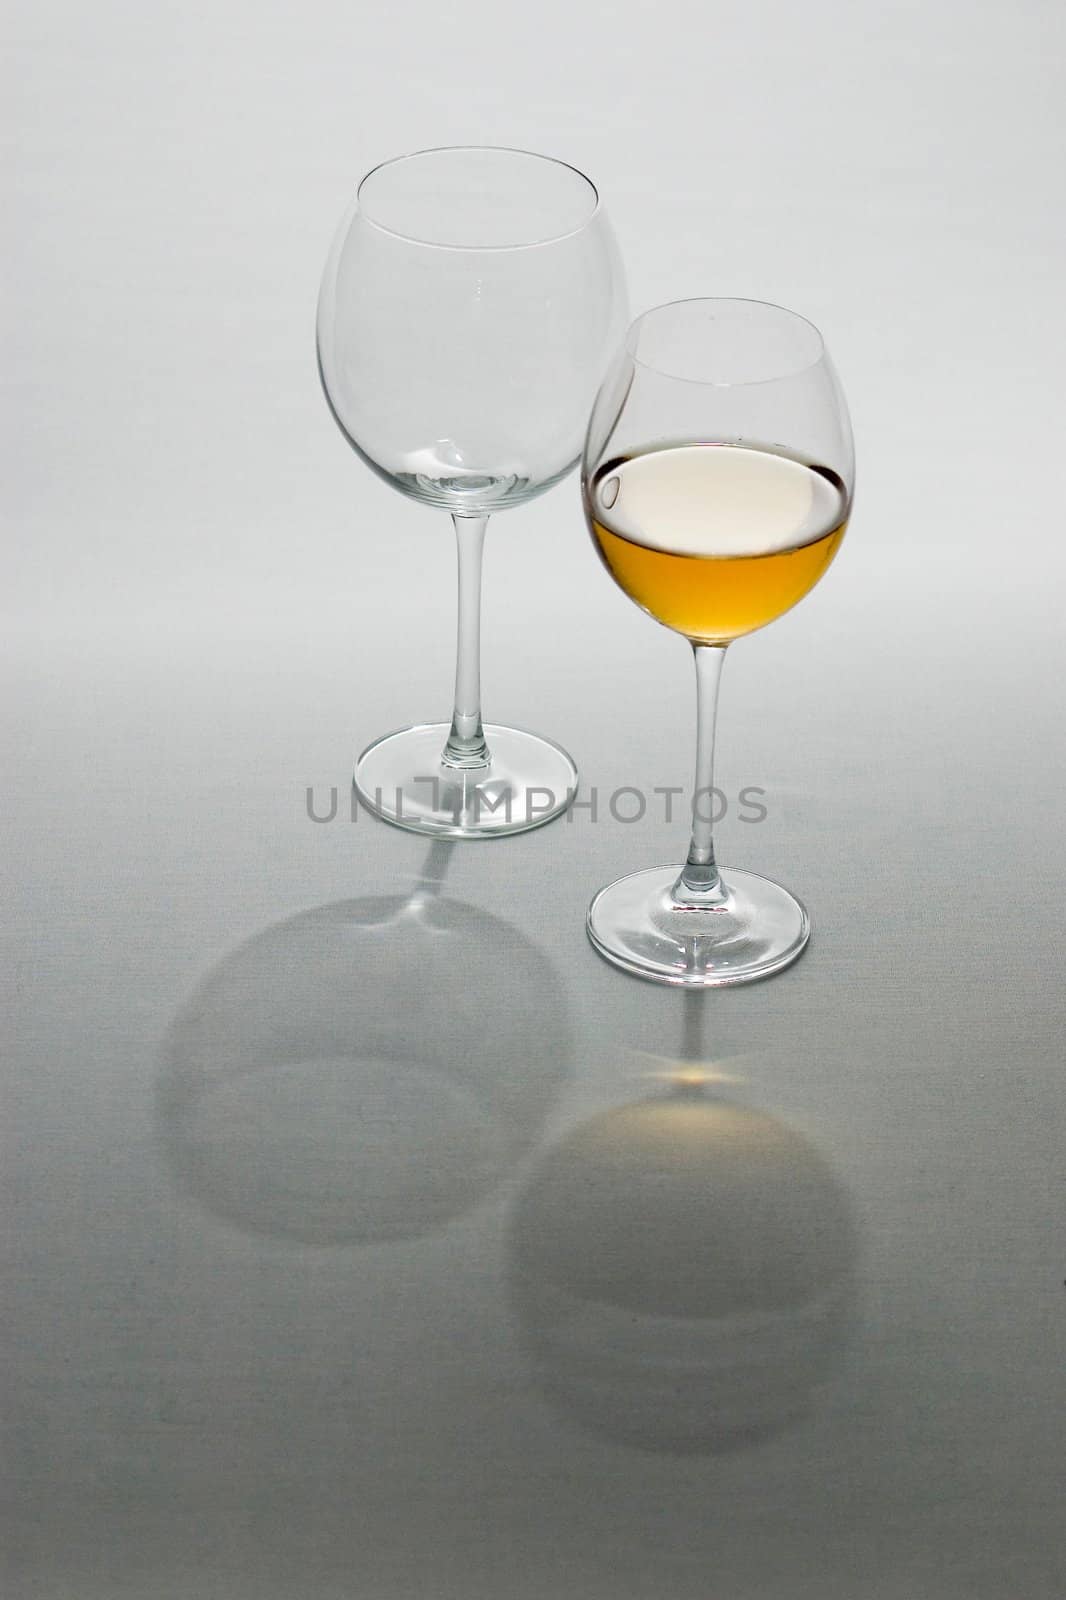 Two tall wine glasses on light background, one filled with white wine